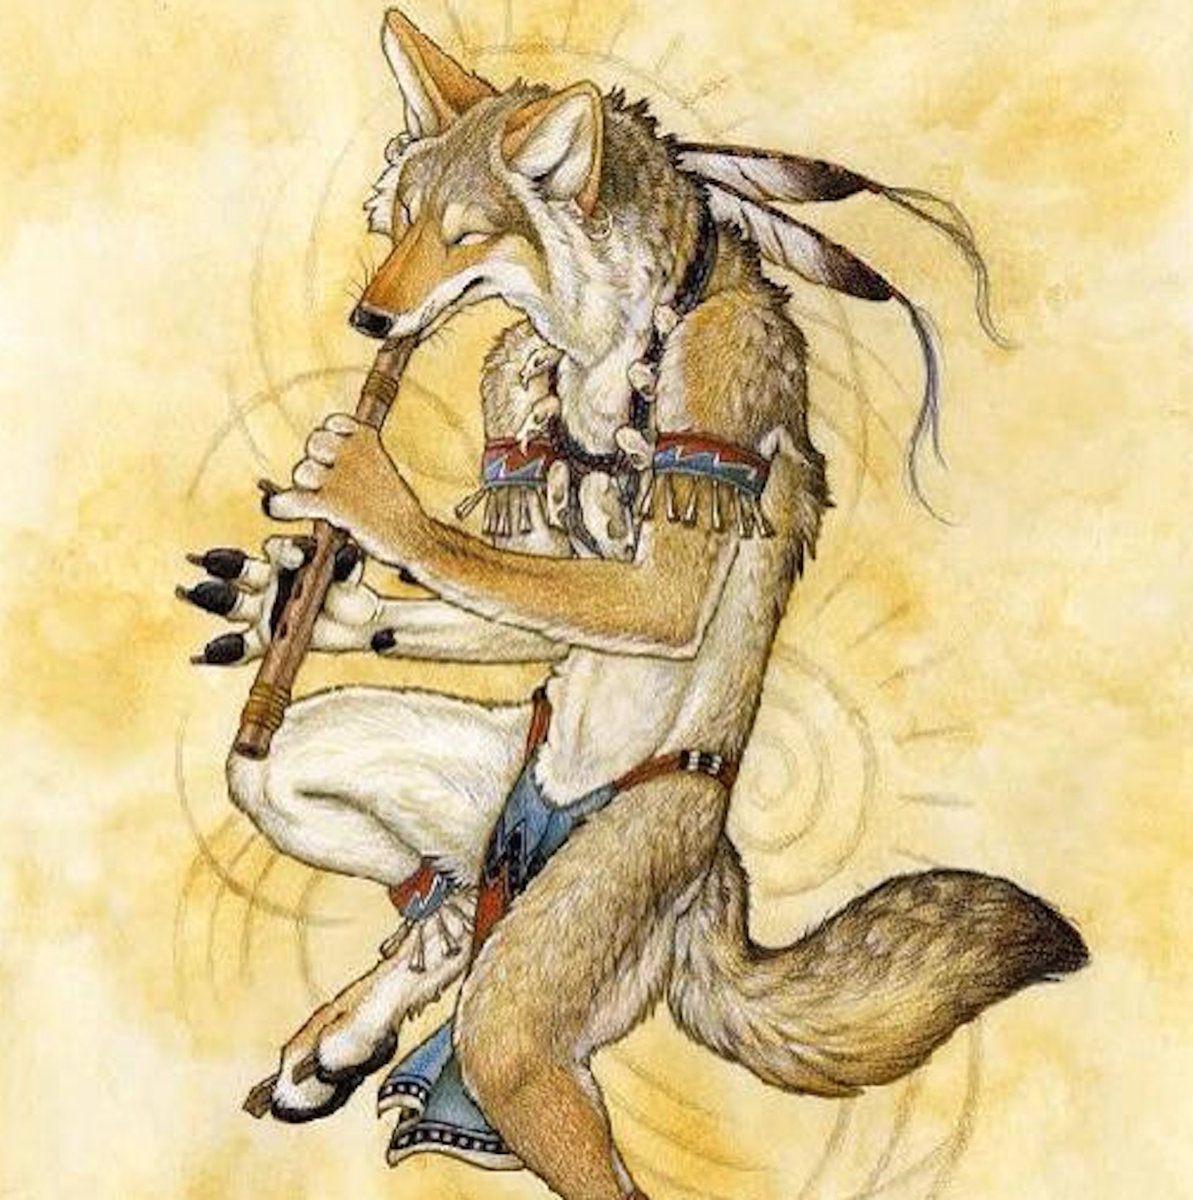 Trickster-coyote